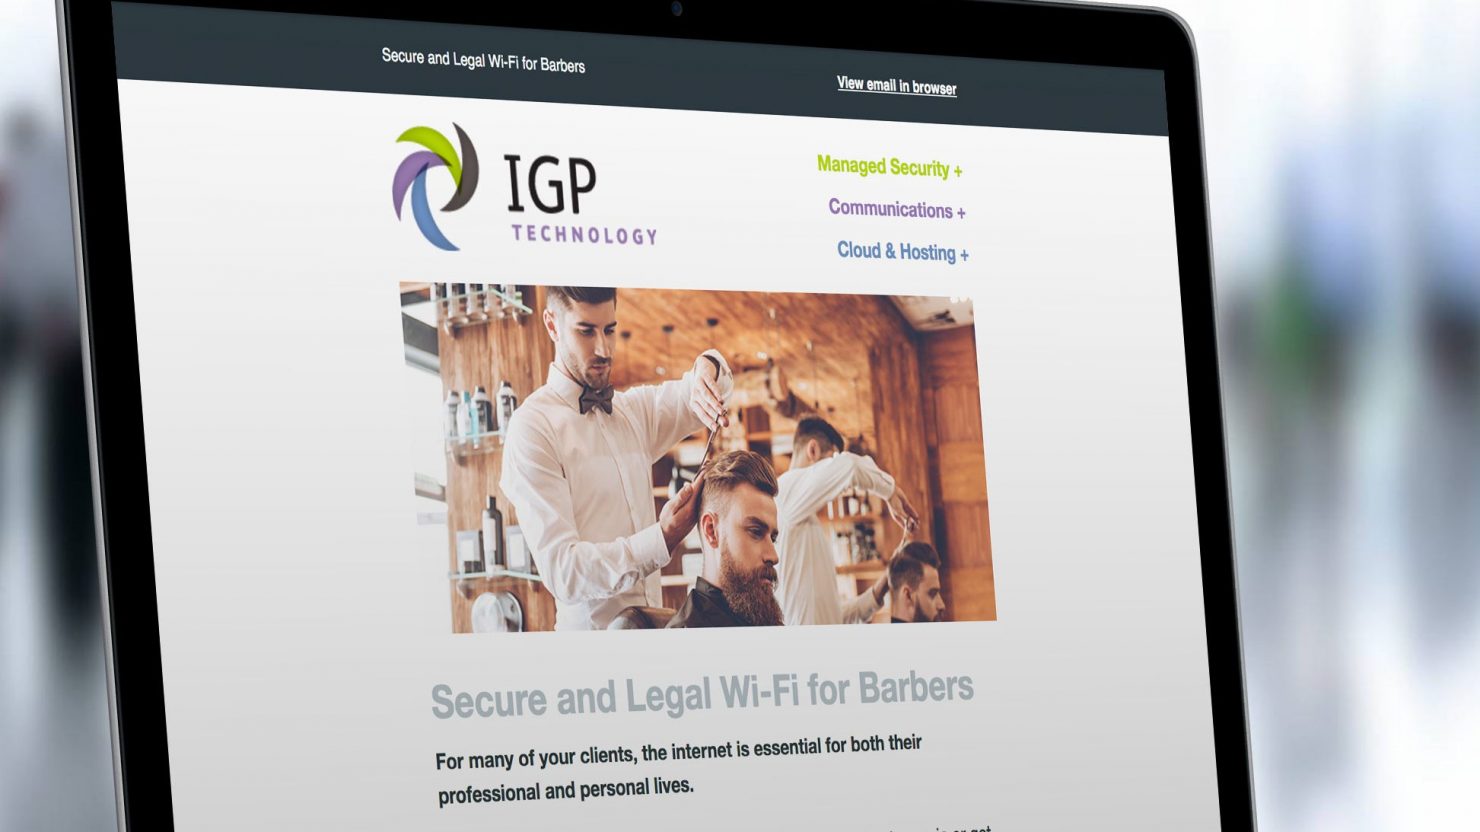 creative email marketing for IGP technology birmingham